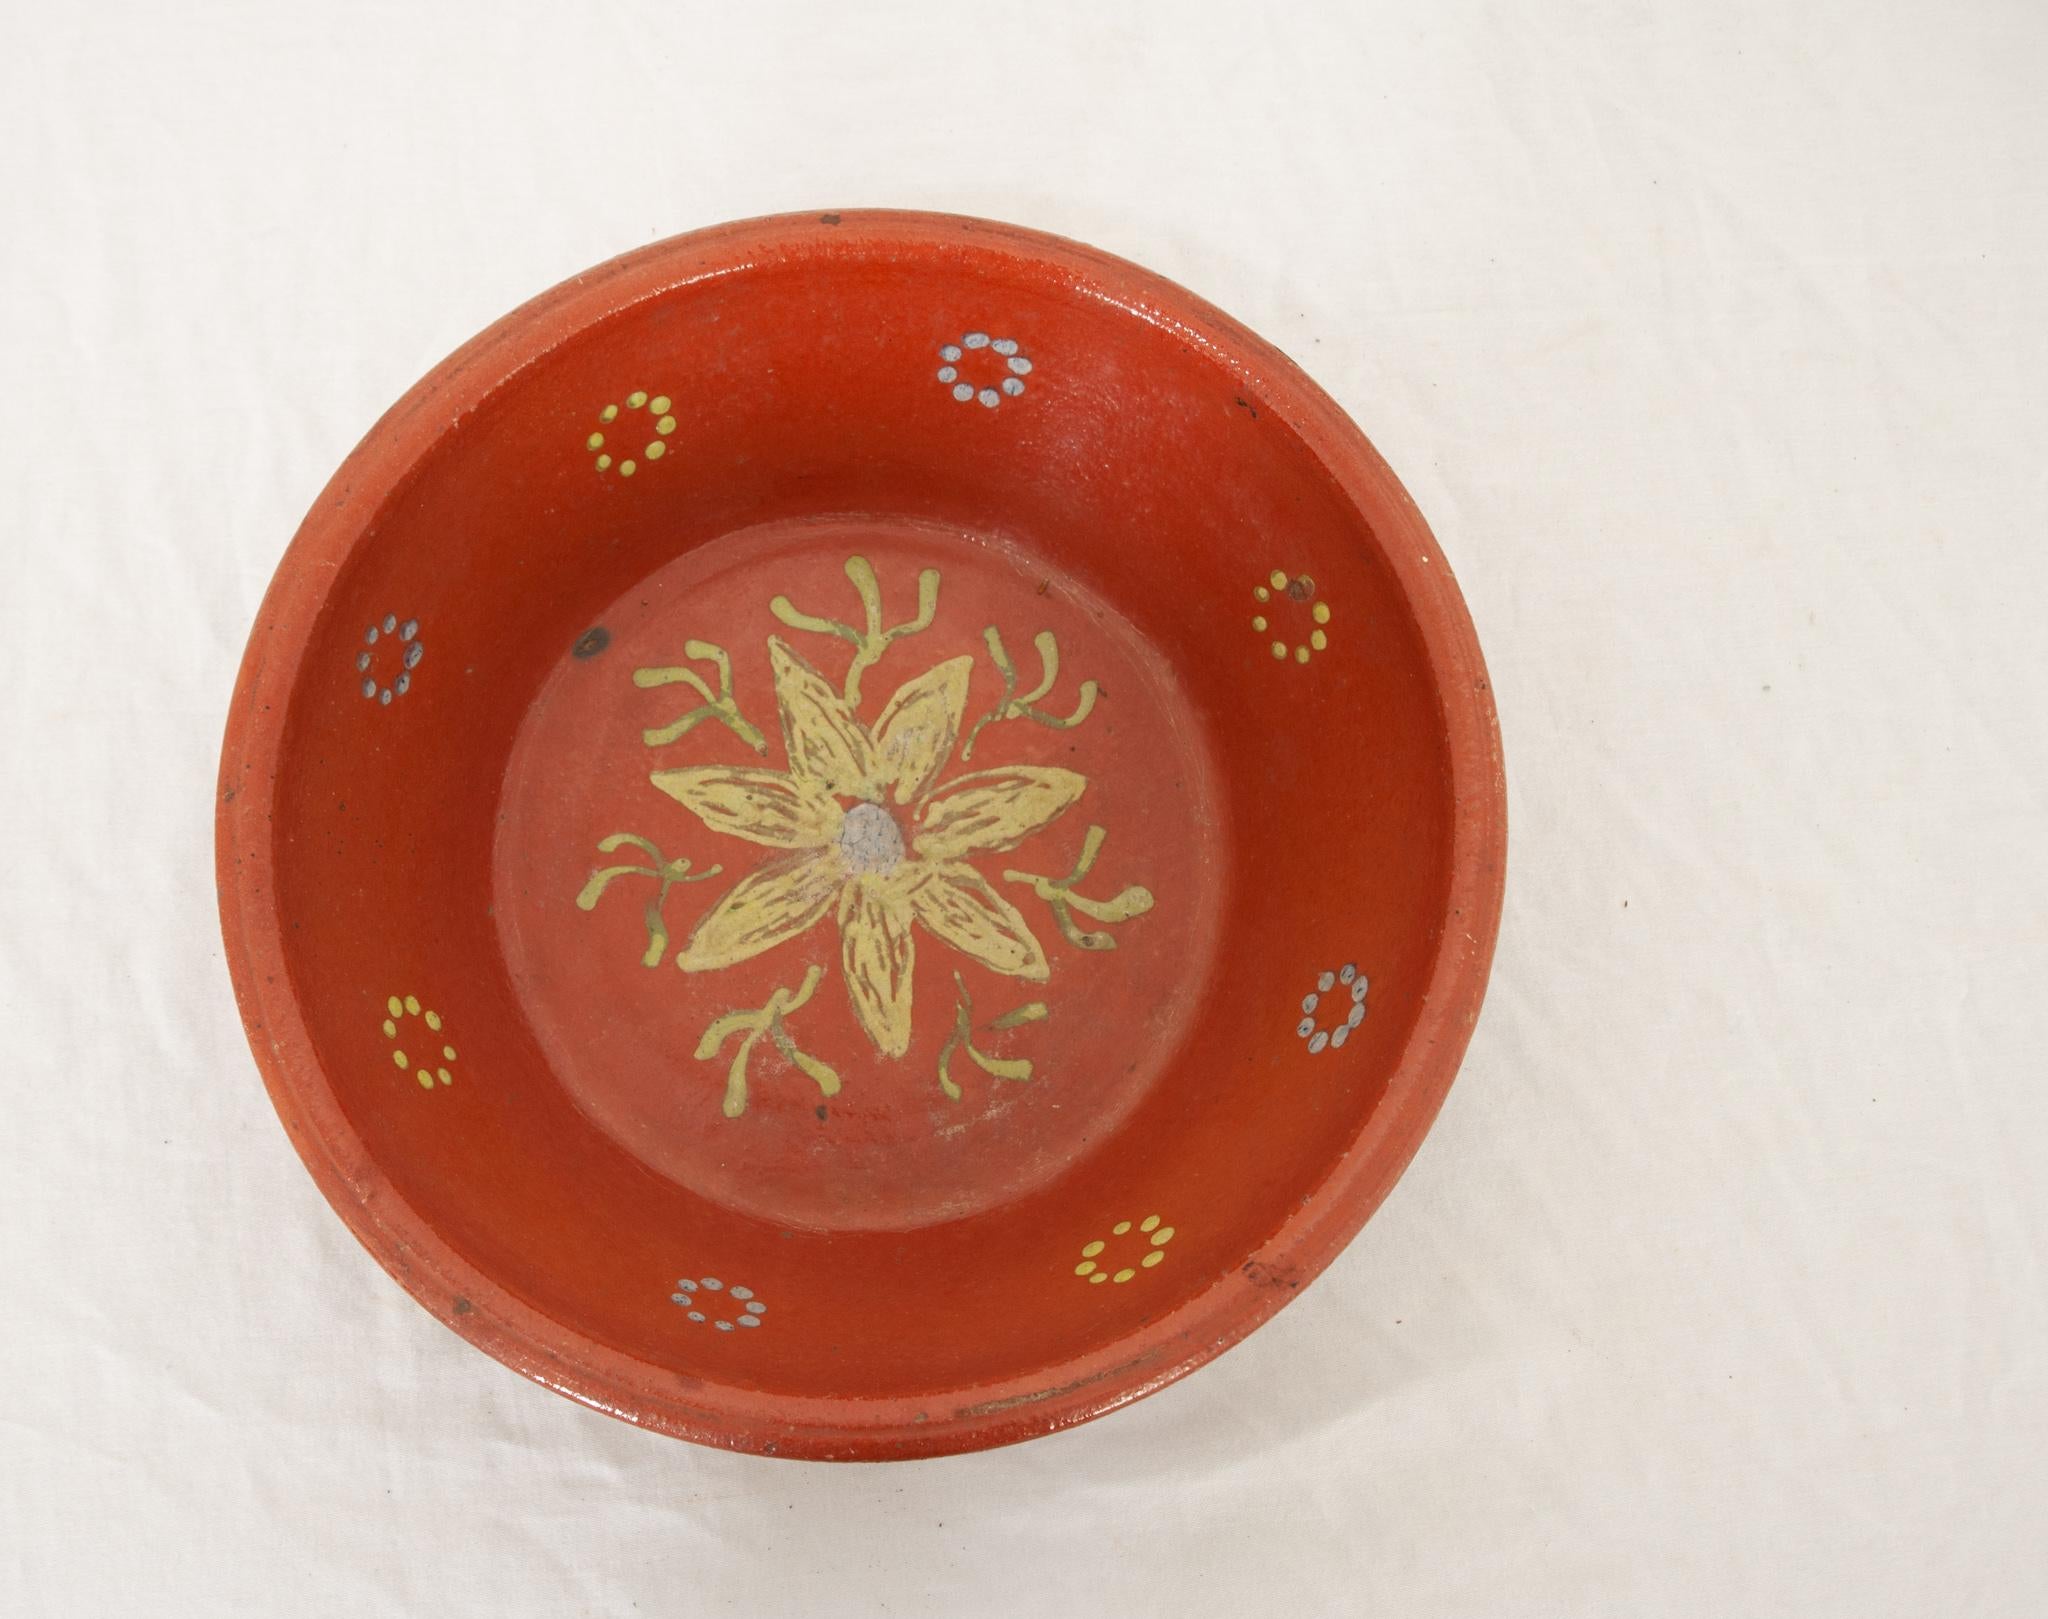 A delightful French 19th century pottery bowl of vibrant color with floral designs. This tall bowl has been glazed a lively warm orange with maize yellow and pale blue rosettes and delicate flower and vine painted in the interior. This is a lovely